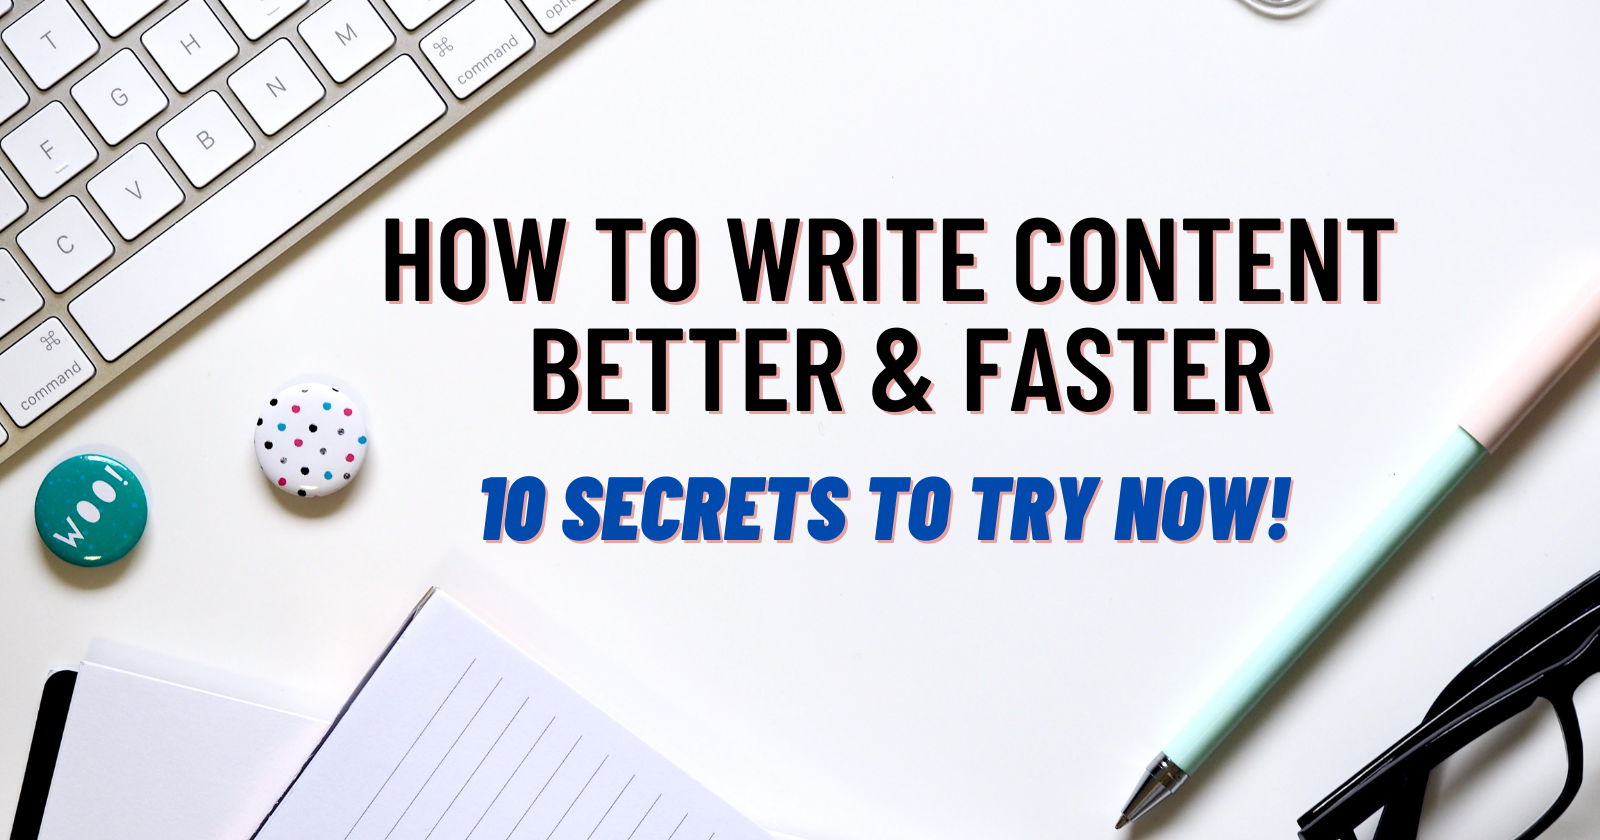 How to Write Content Better & Faster: 26 Secrets to Try Now